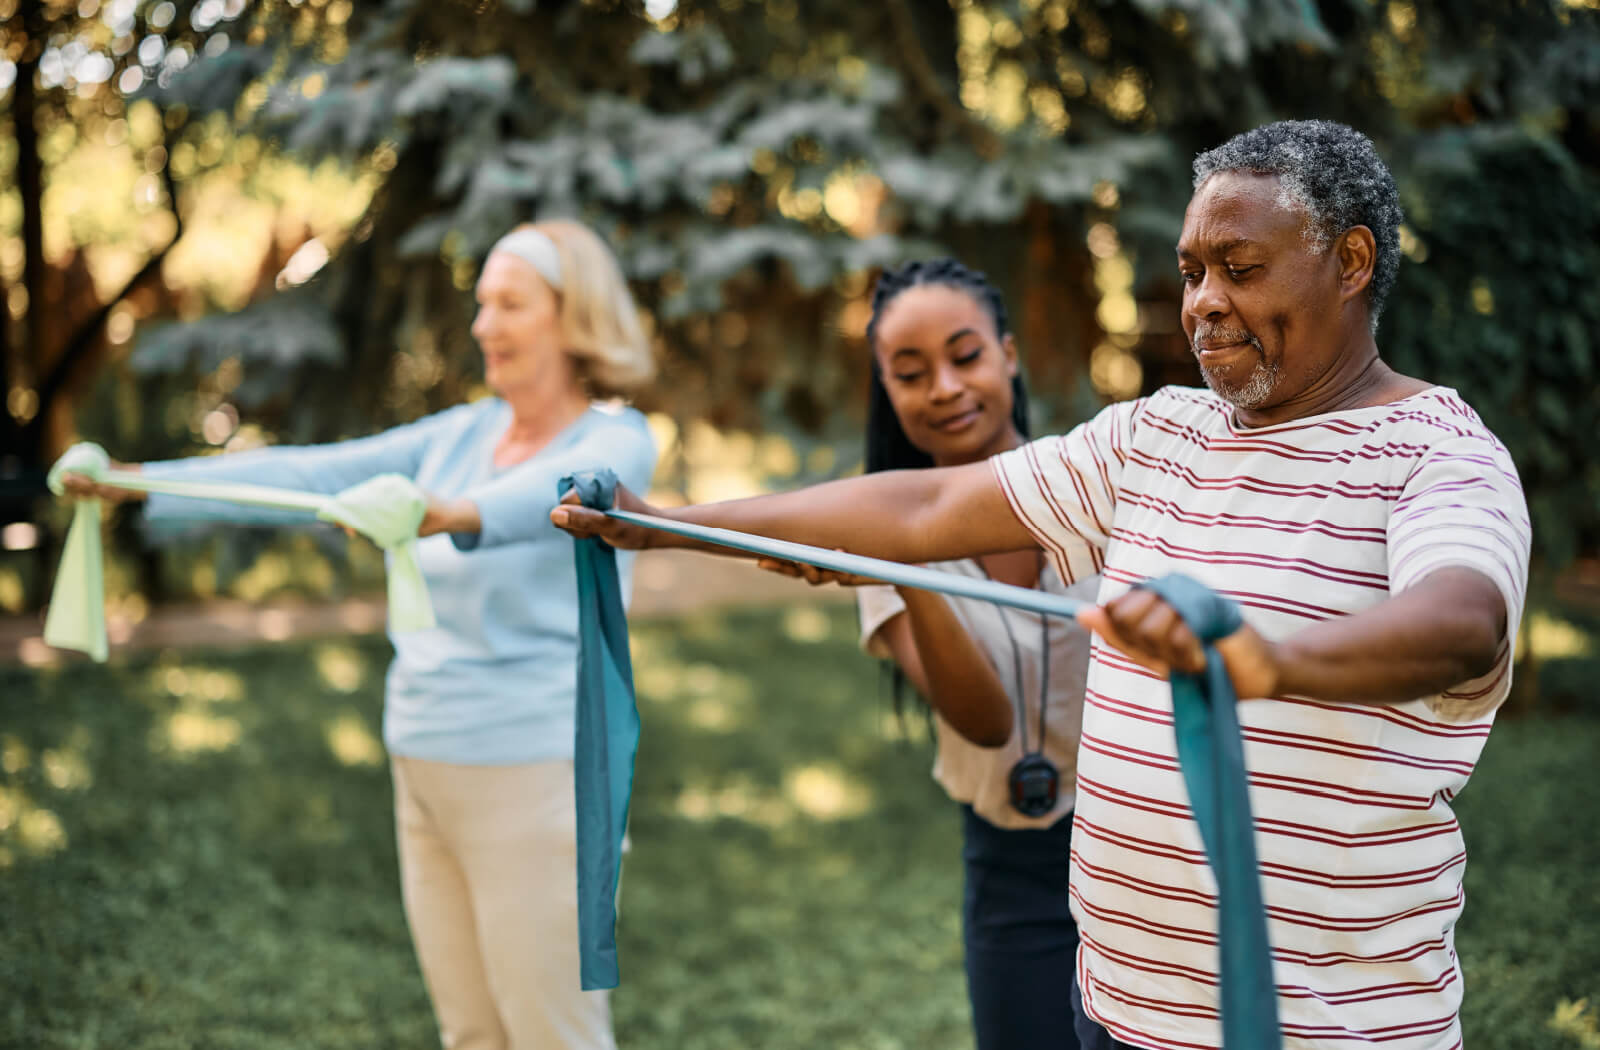 A senior man and a senior woman using resistance bands during physical therapy while being assisted by a therapist in the backyard of a senior living community.